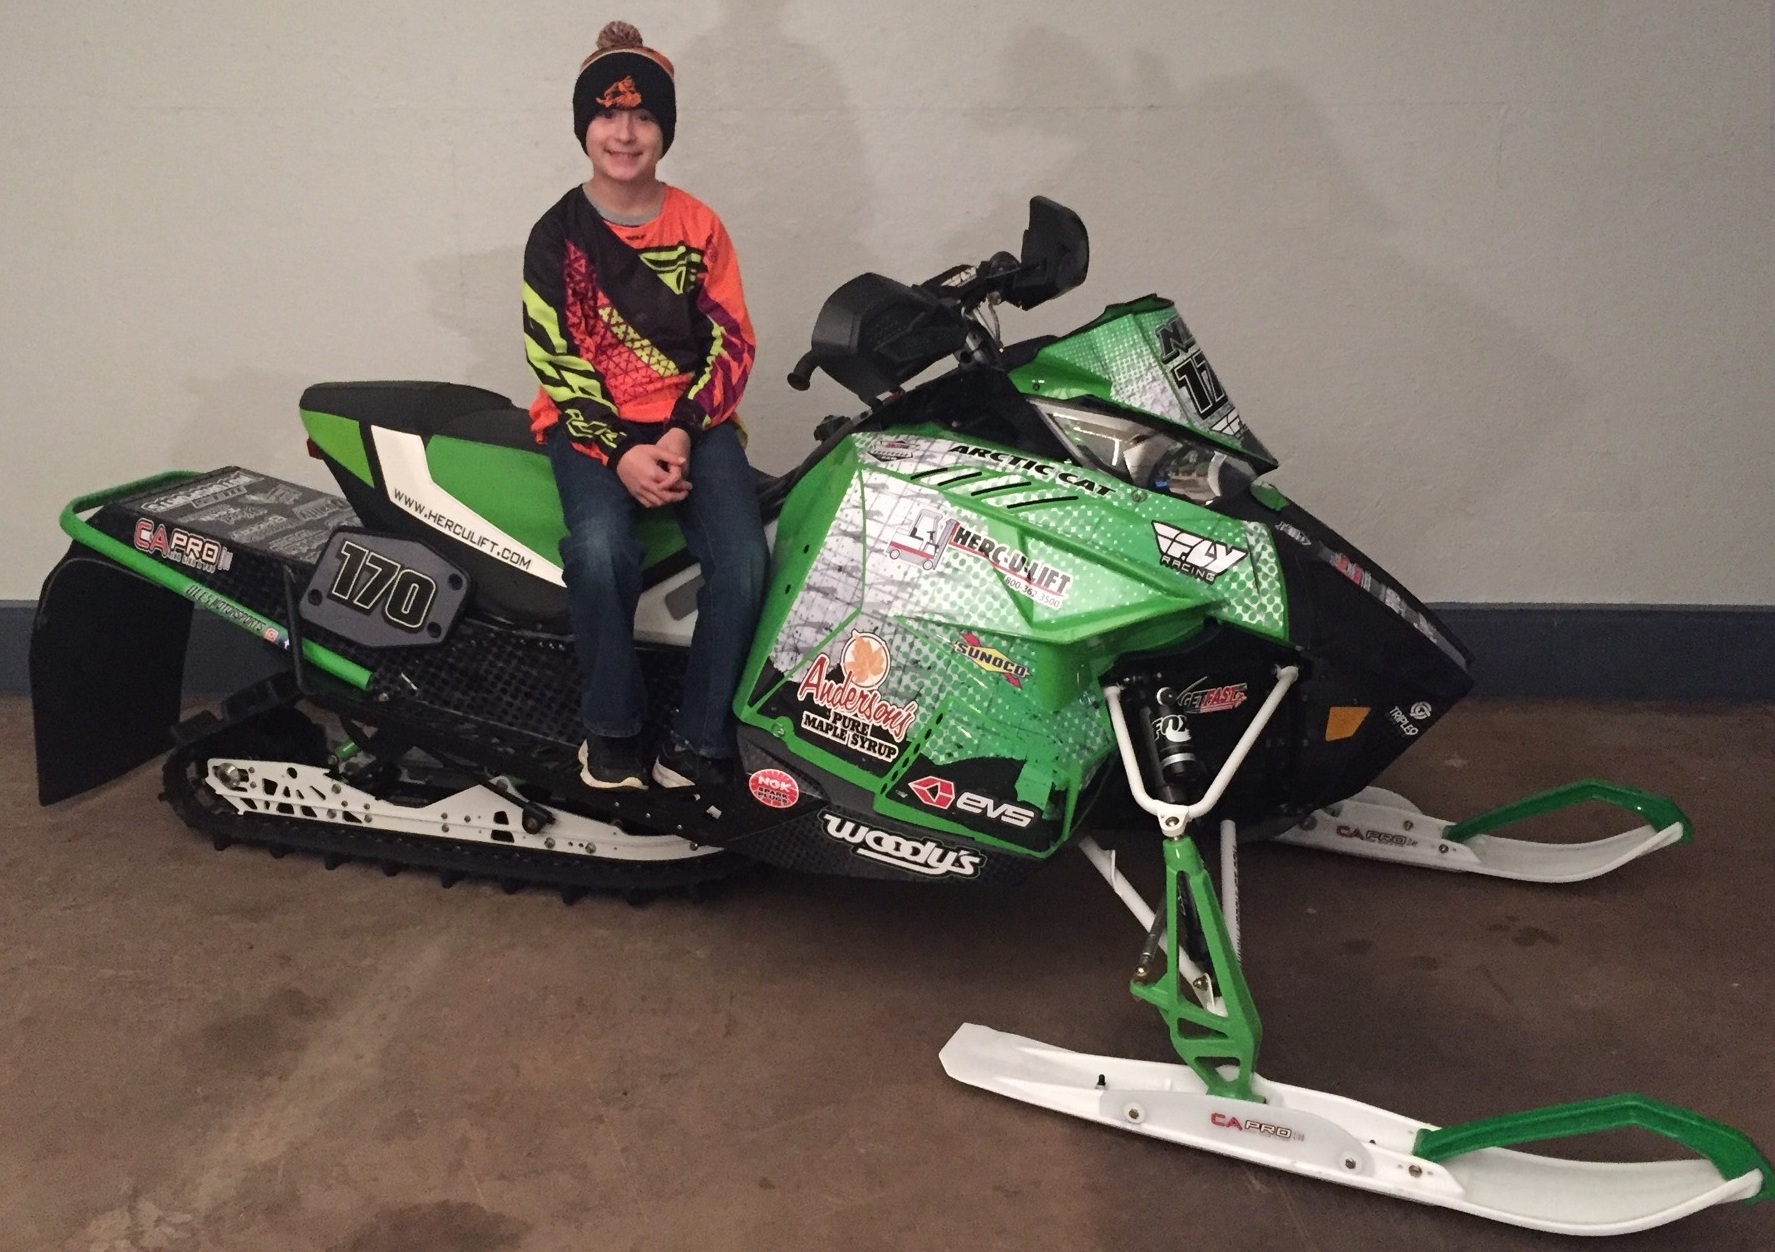 Neil Dees on his 2015 / 2016 Arctic Cat Race Sled.